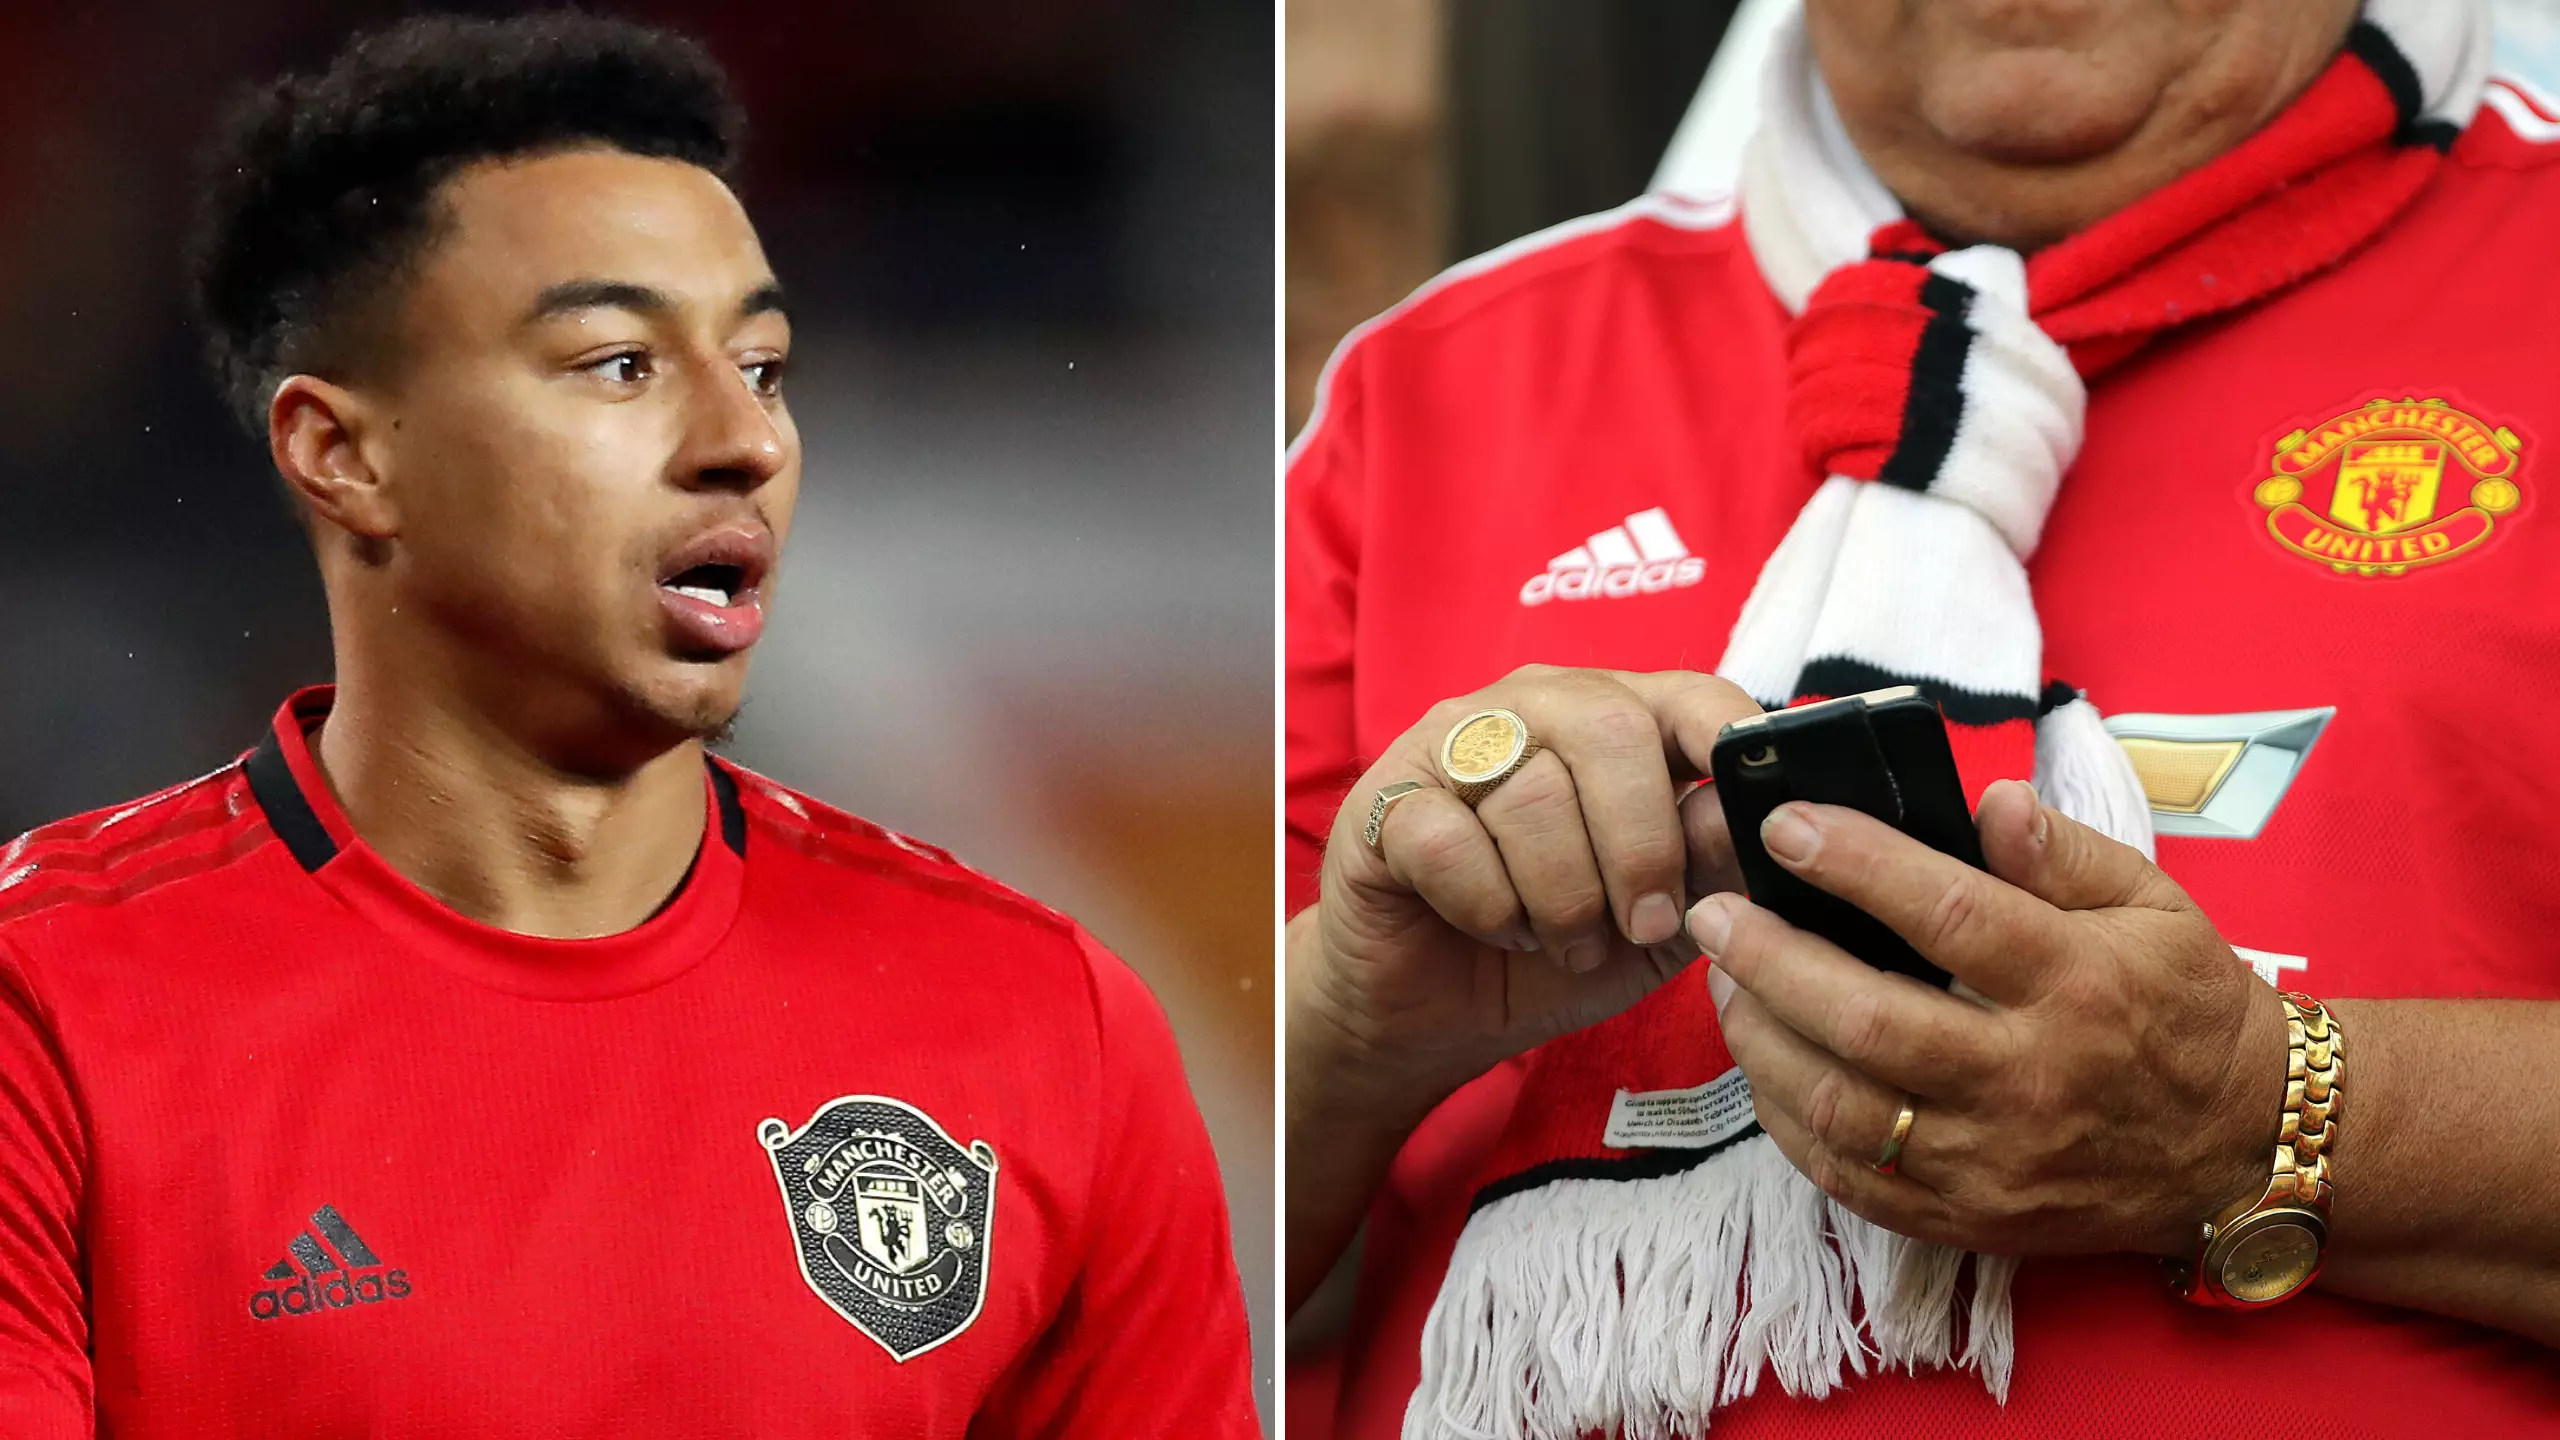 Manchester United Are Looking For £100,000-A-Year 'Superfan' To Run Their Social Media